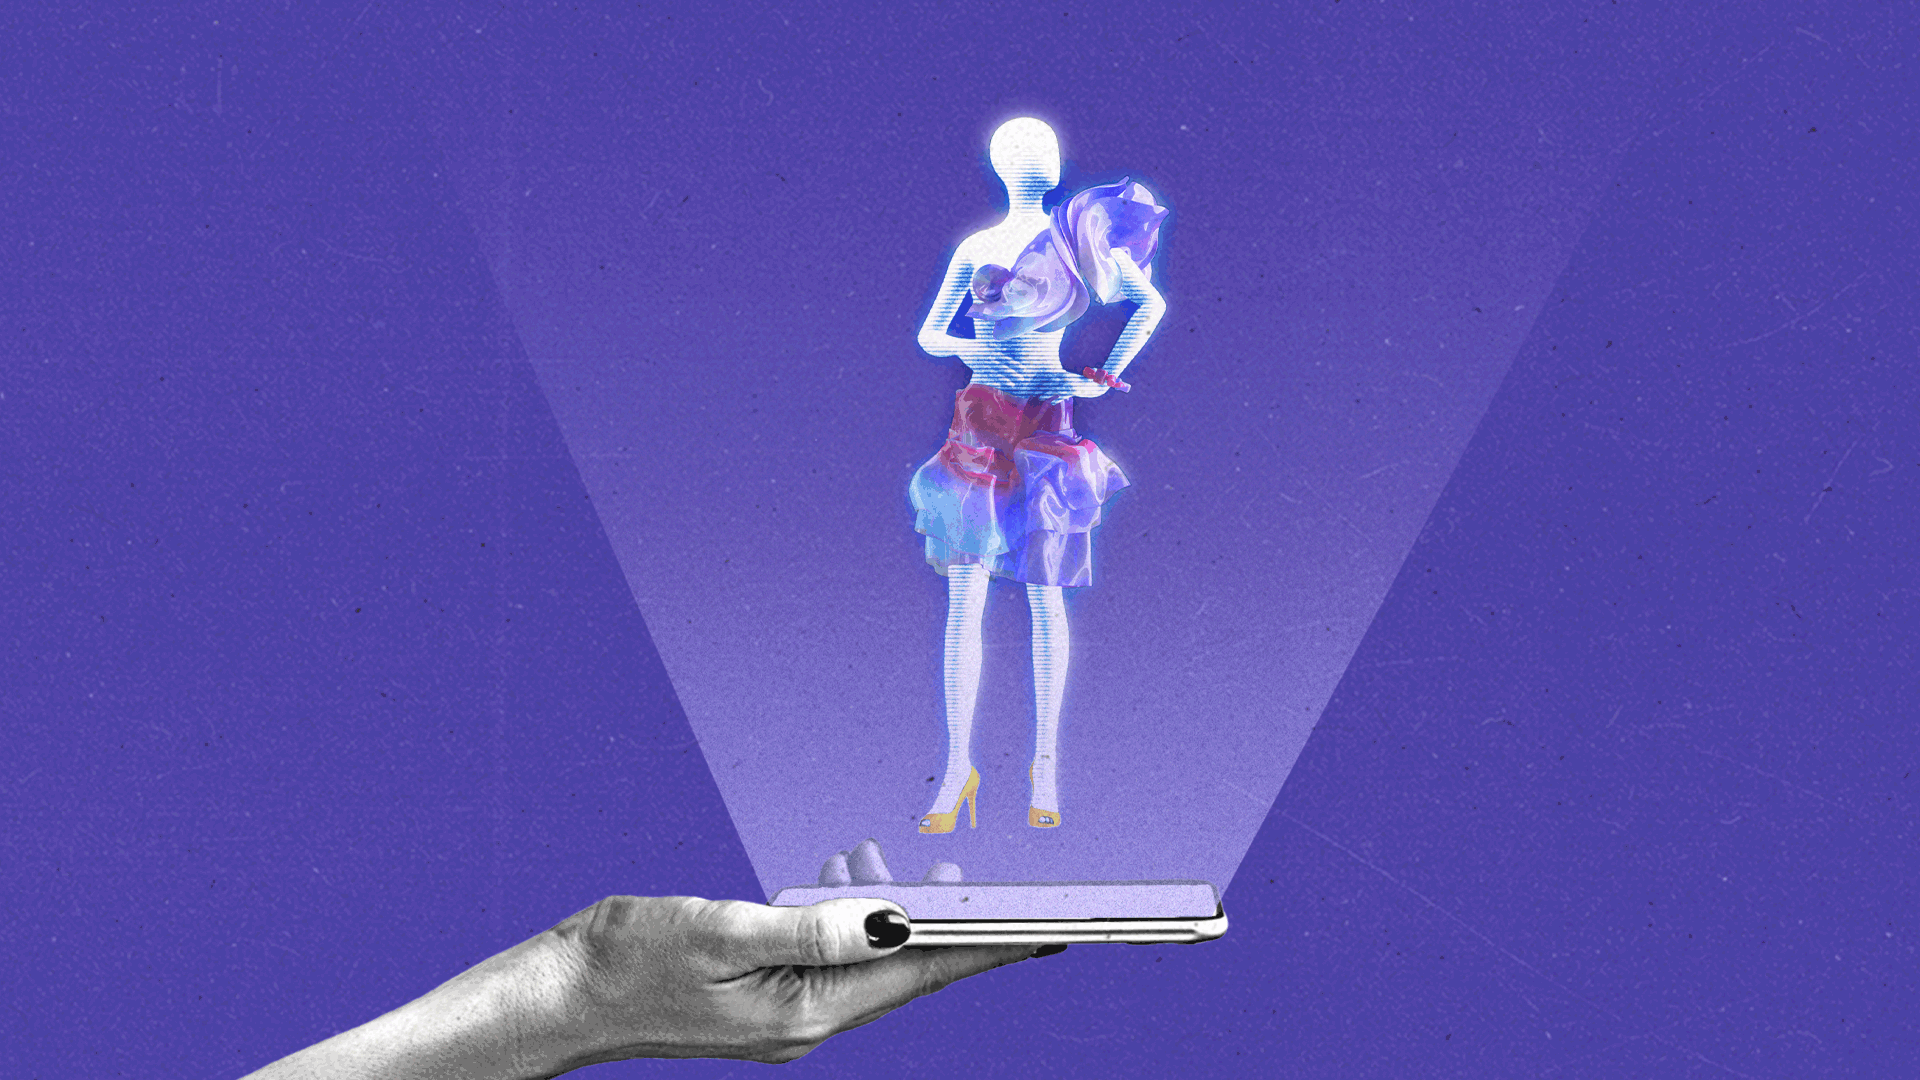 A digital hologram of a model wearing a dress is projected from a mobile device held by a woman's hand.